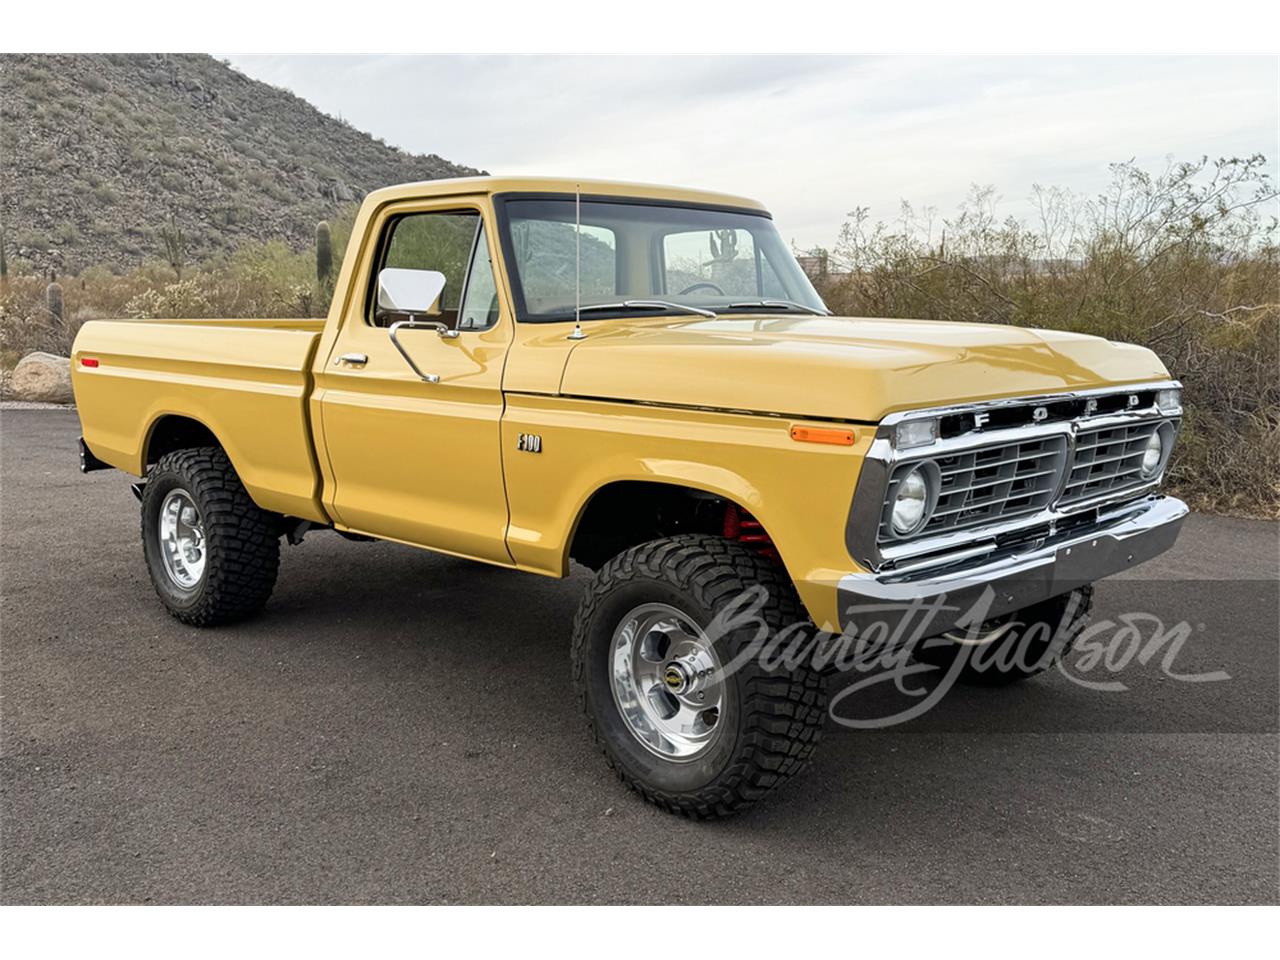 For Sale at Auction: 1973 Ford F100 in Scottsdale, Arizona for sale in Scottsdale, AZ